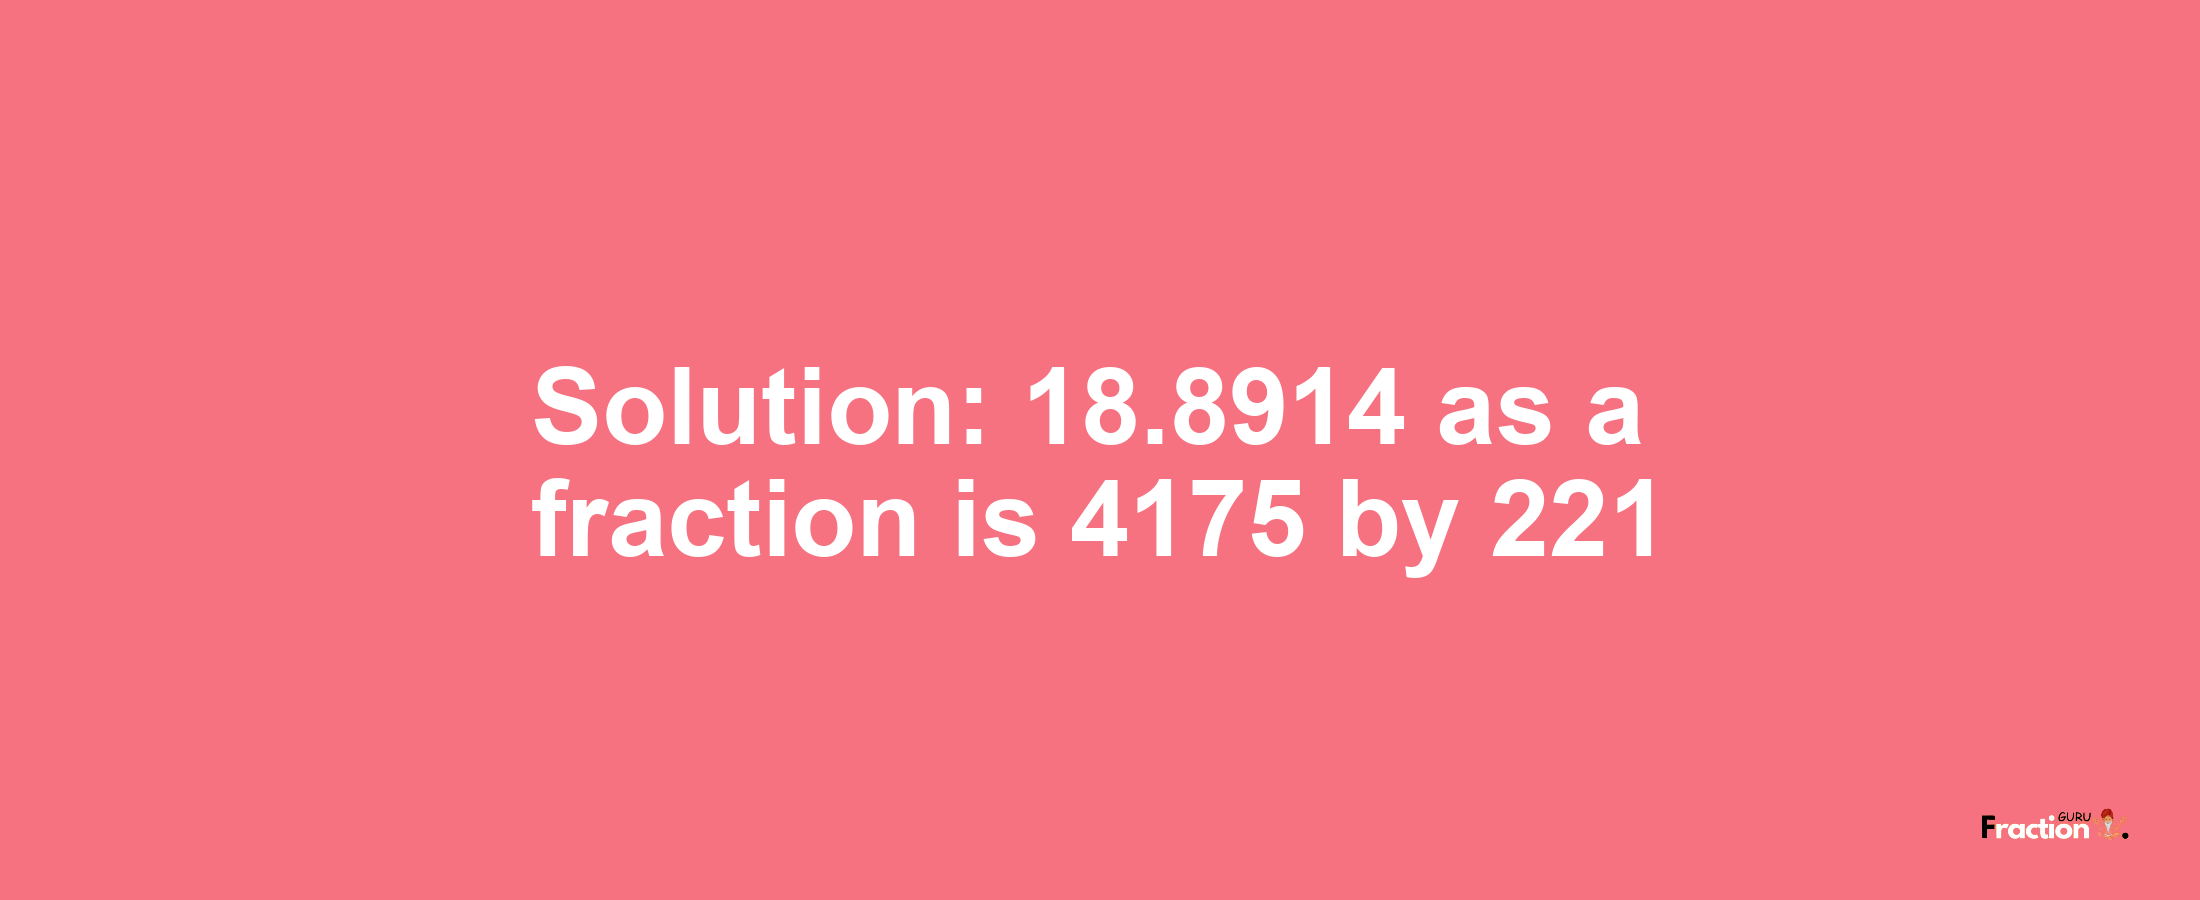 Solution:18.8914 as a fraction is 4175/221